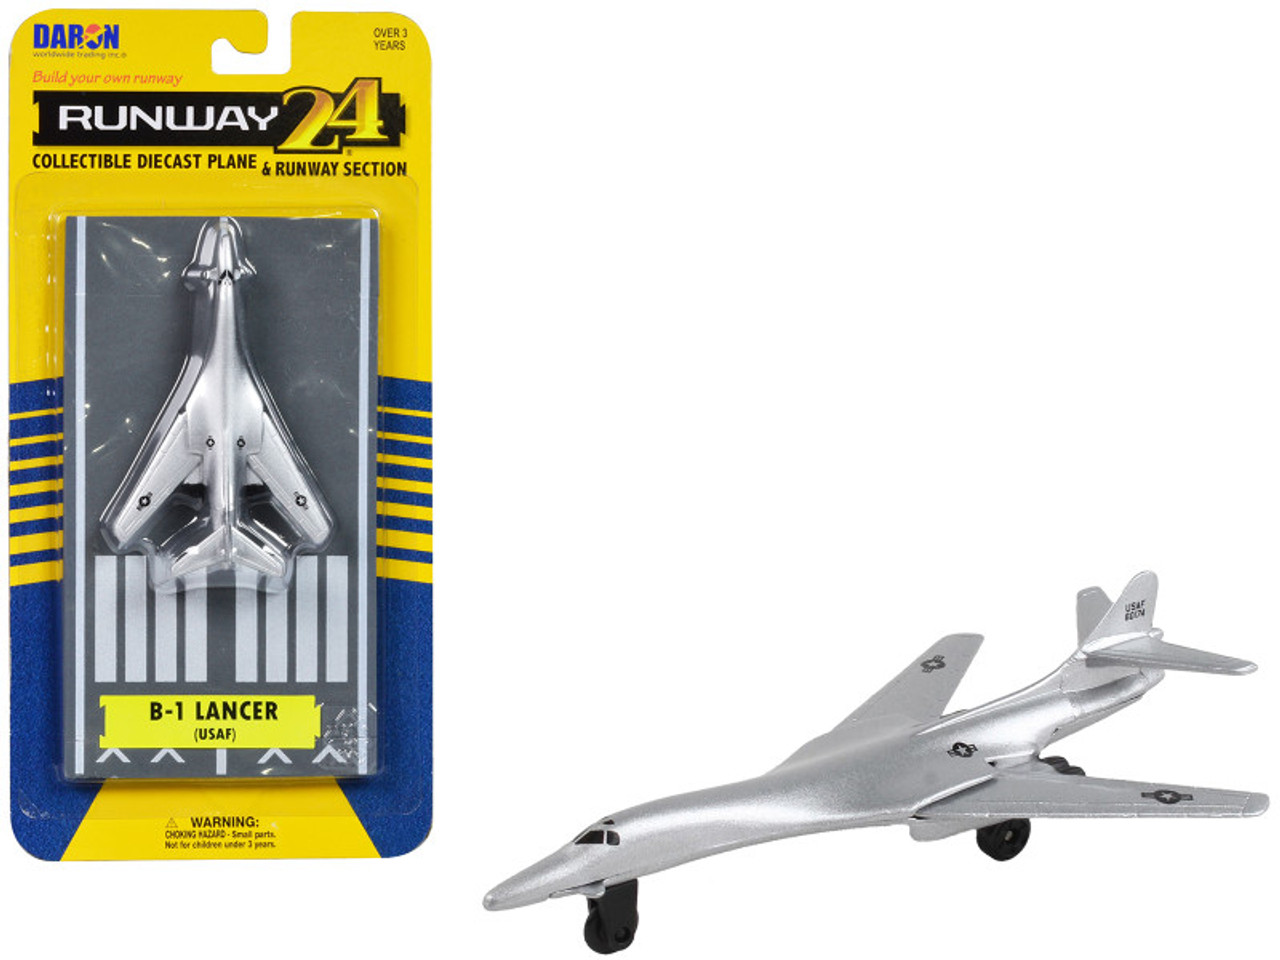 Rockwell B-1 Lancer Bomber Aircraft Silver Metallic "United States Air Force" with Runway Section Diecast Model Airplane by Runway24